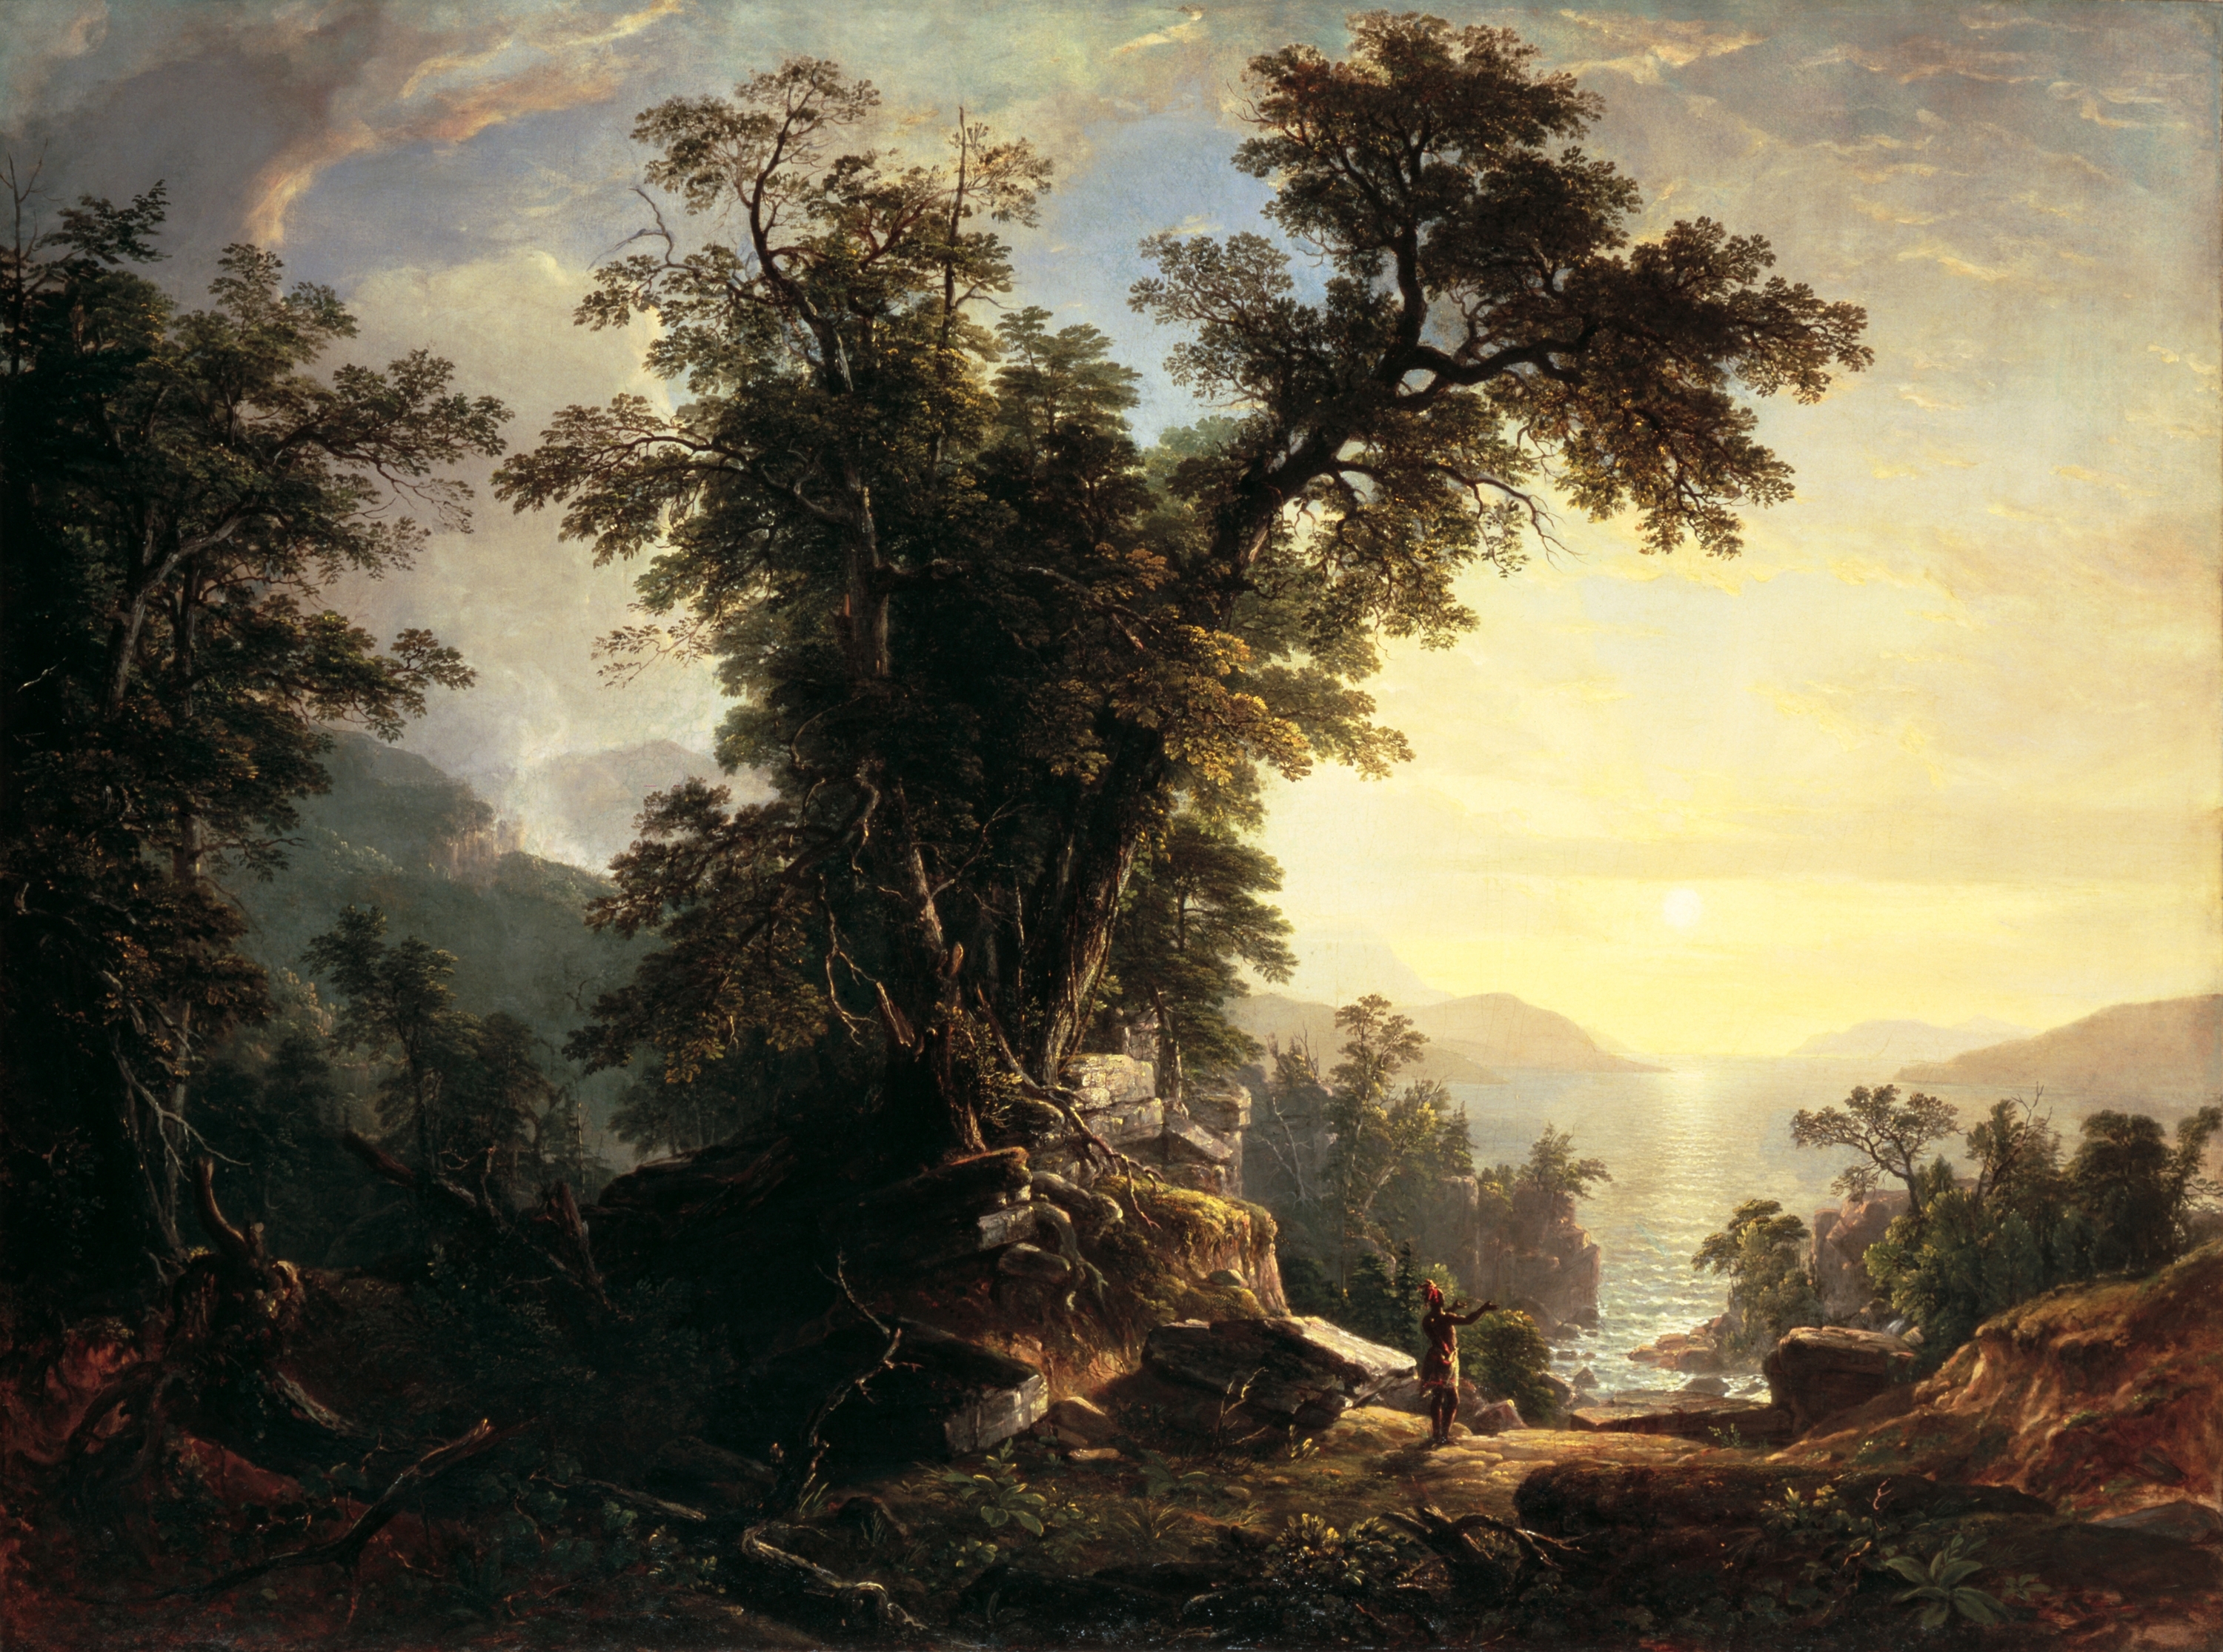 The Indian's Vespers by Asher Brown Durand, 1847